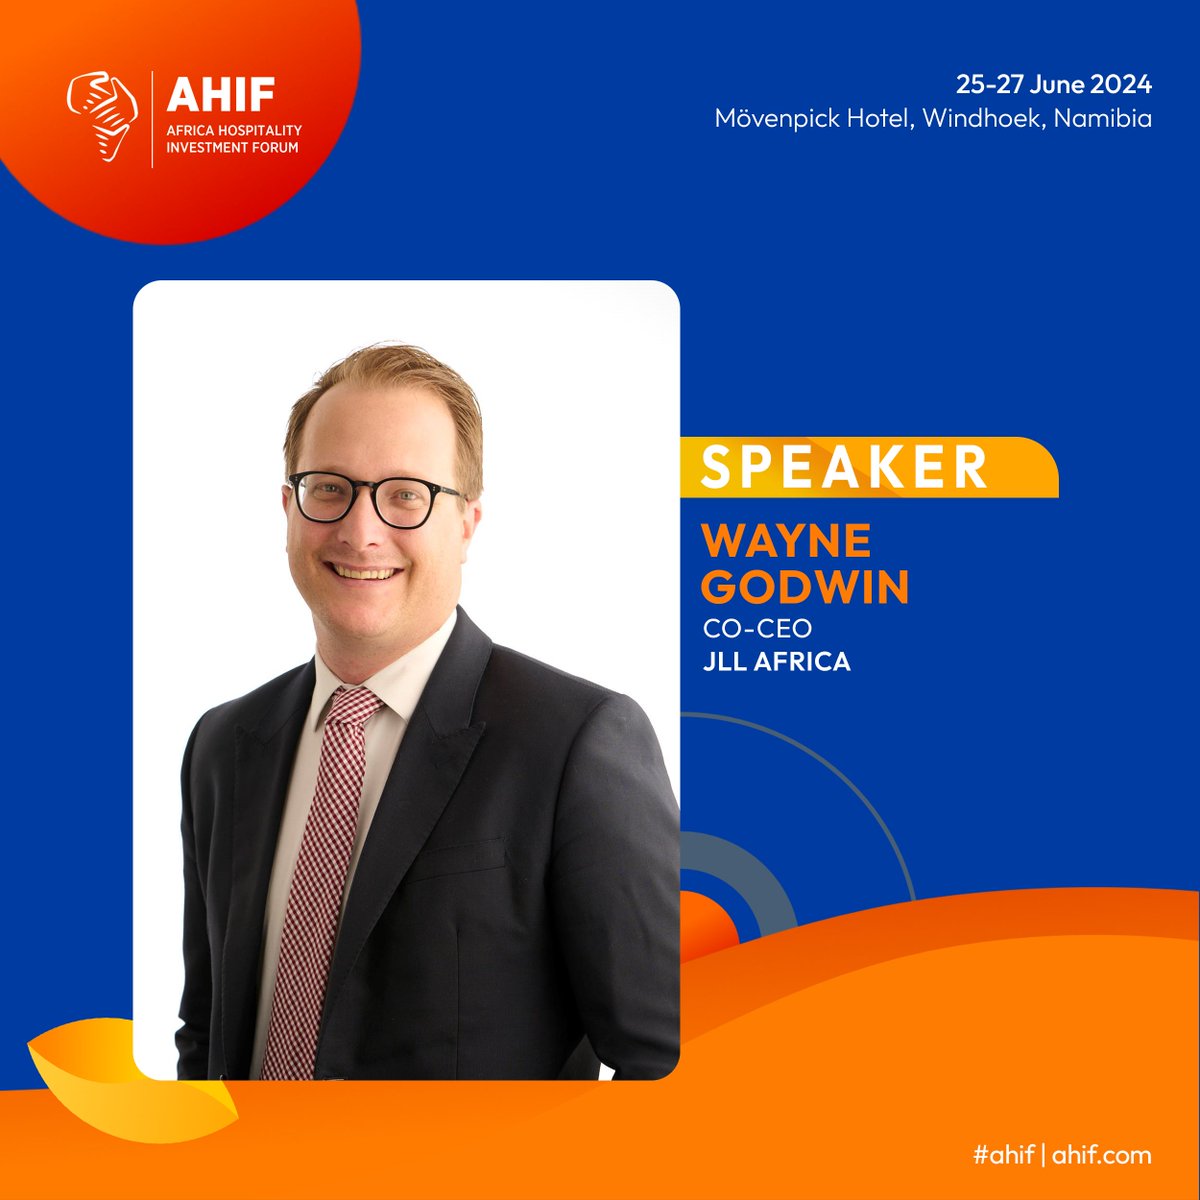 Wayne, Co-CEO, JLL Africa, is a preeminent advisor with over 13 years of experience navigating the dynamic hotel market across Sub-Saharan Africa. Register for AHIF and unlock the full potential of your Sub-Saharan Africa ventures at AHIF 2024. hubs.la/Q02rsXXd0